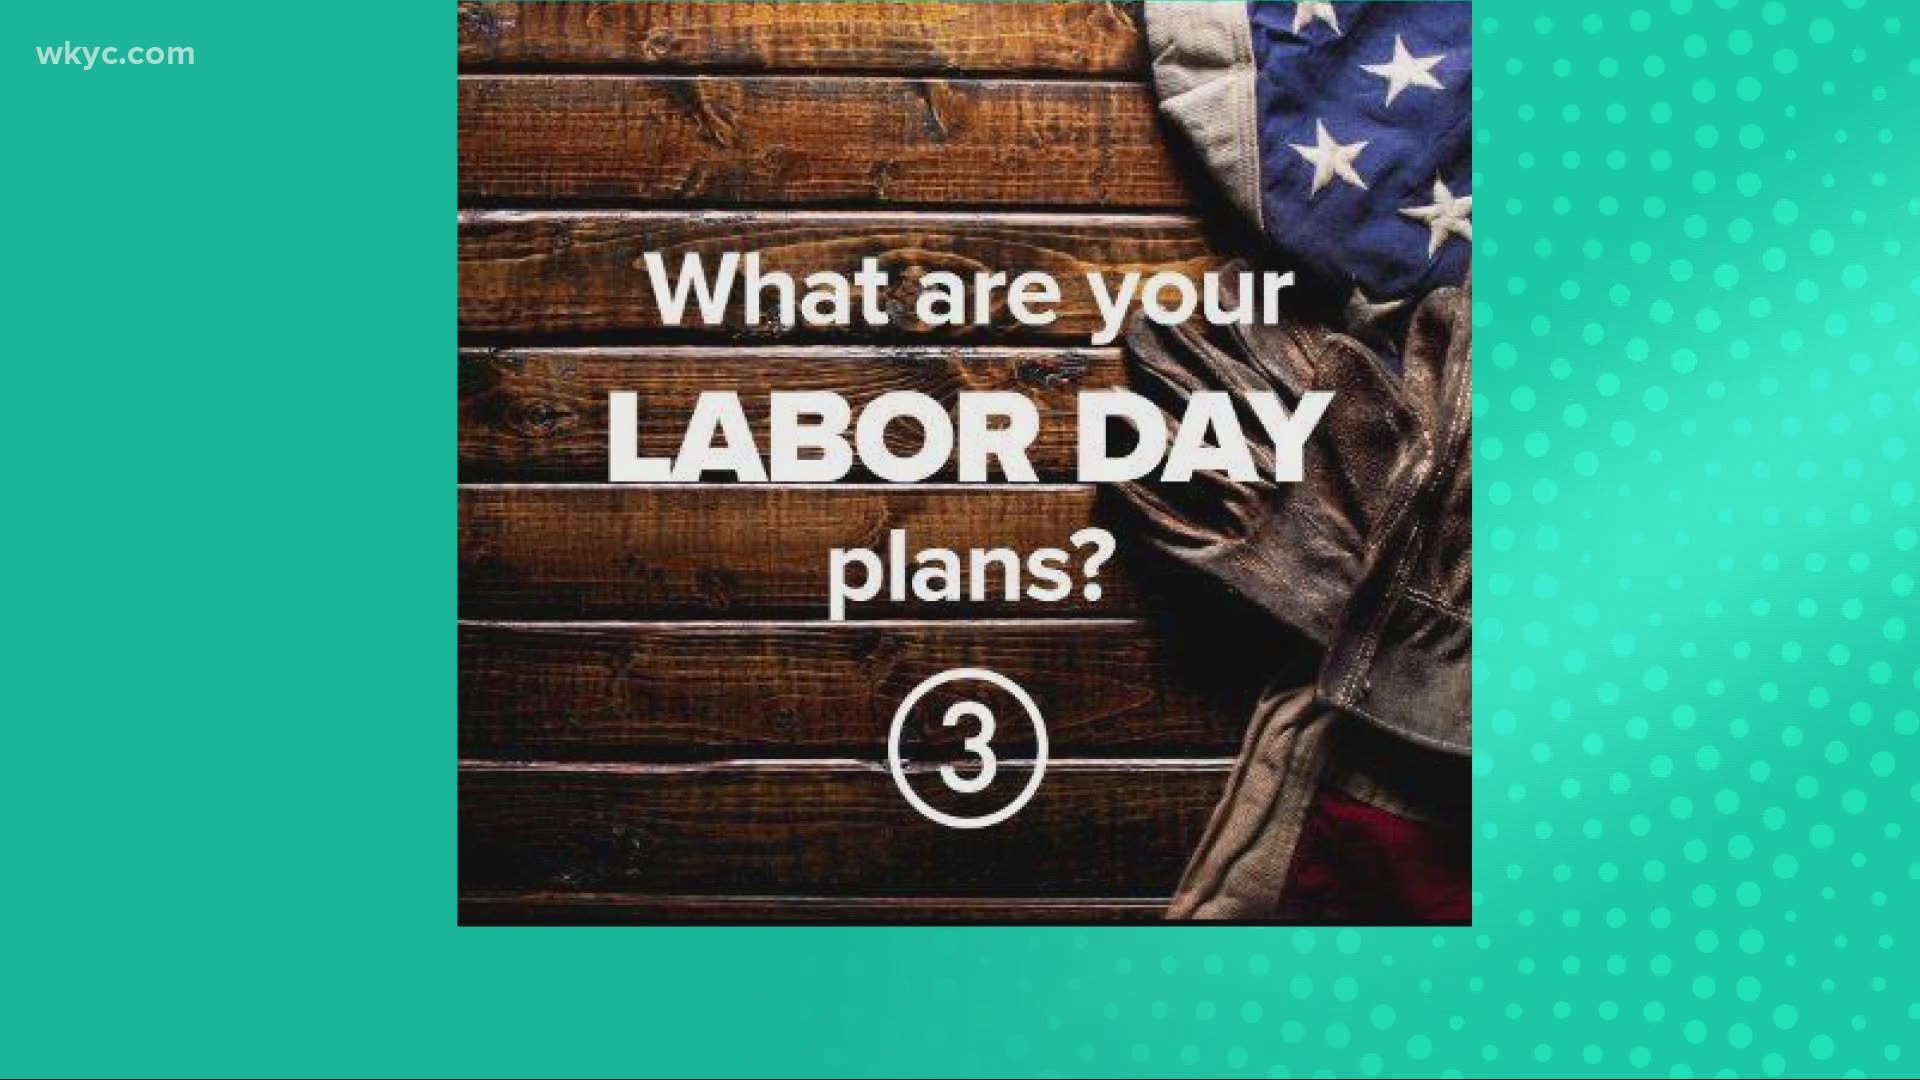 Labor Day is definitely different this year due to the COVID-19 pandemic. So how are your celebrating the holiday? Here's what some 3News viewers are saying.